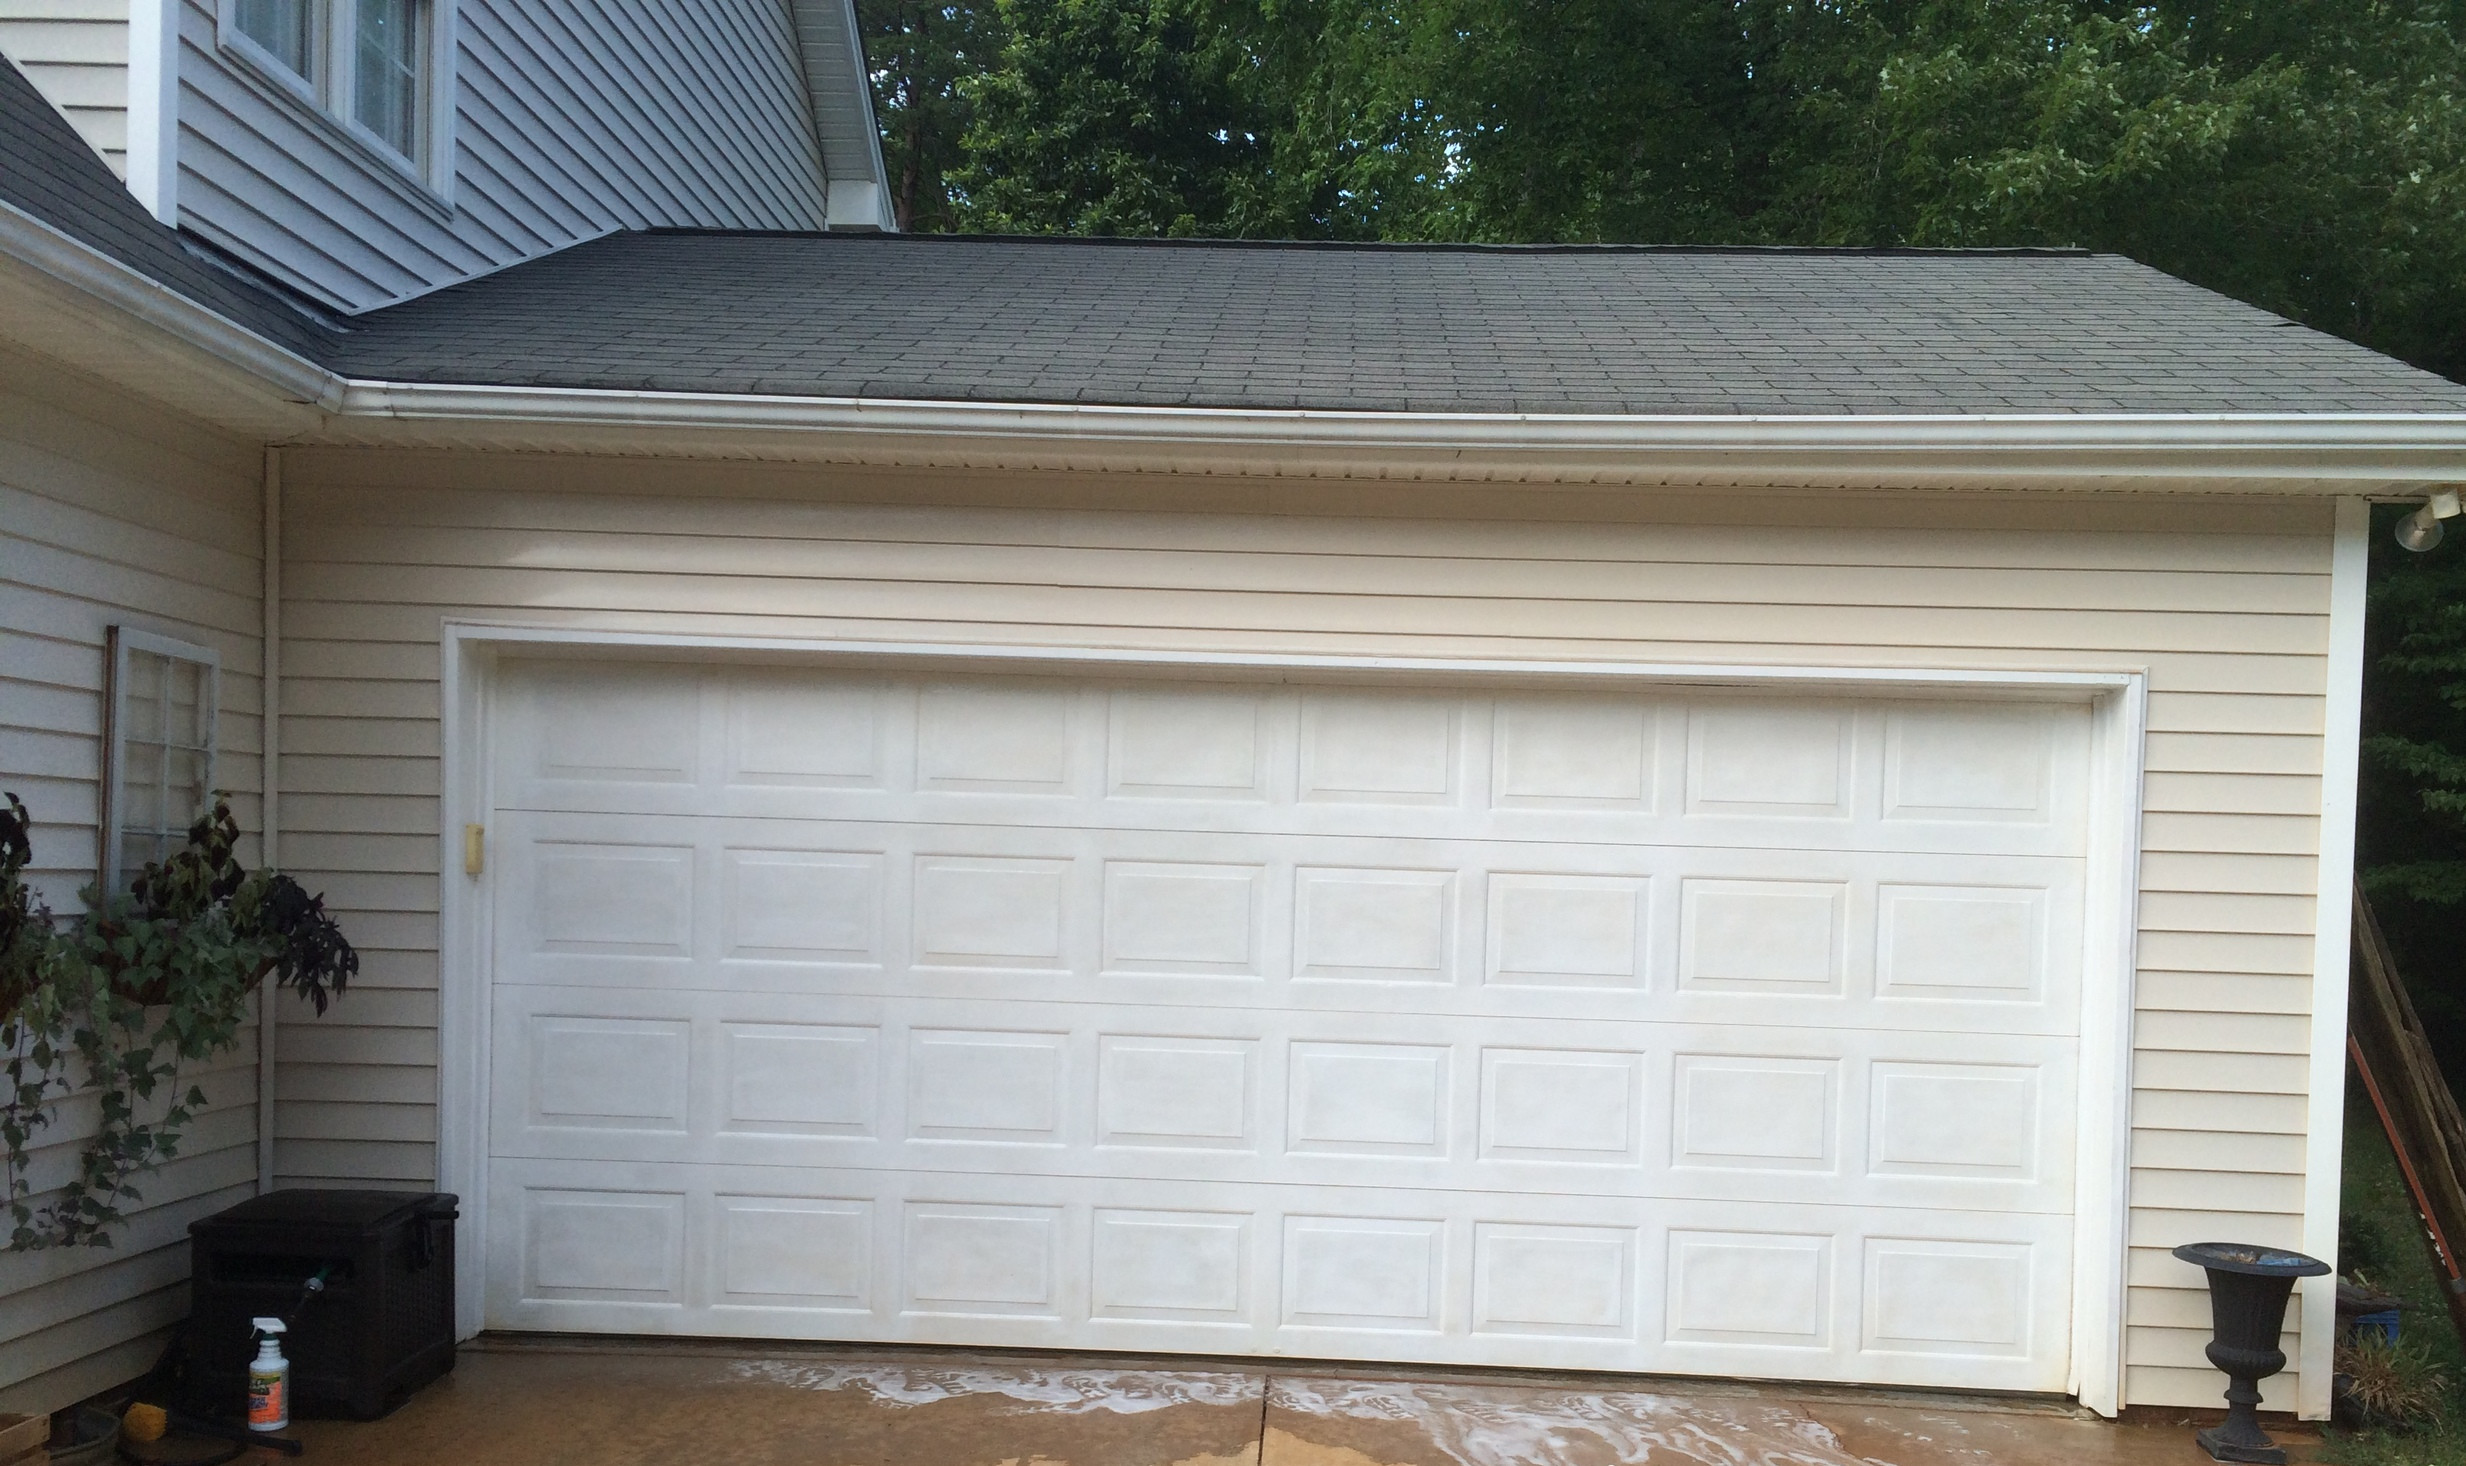 Swing Out Garage Doors Lowes
 Carriage Style Garage Doors Lowes